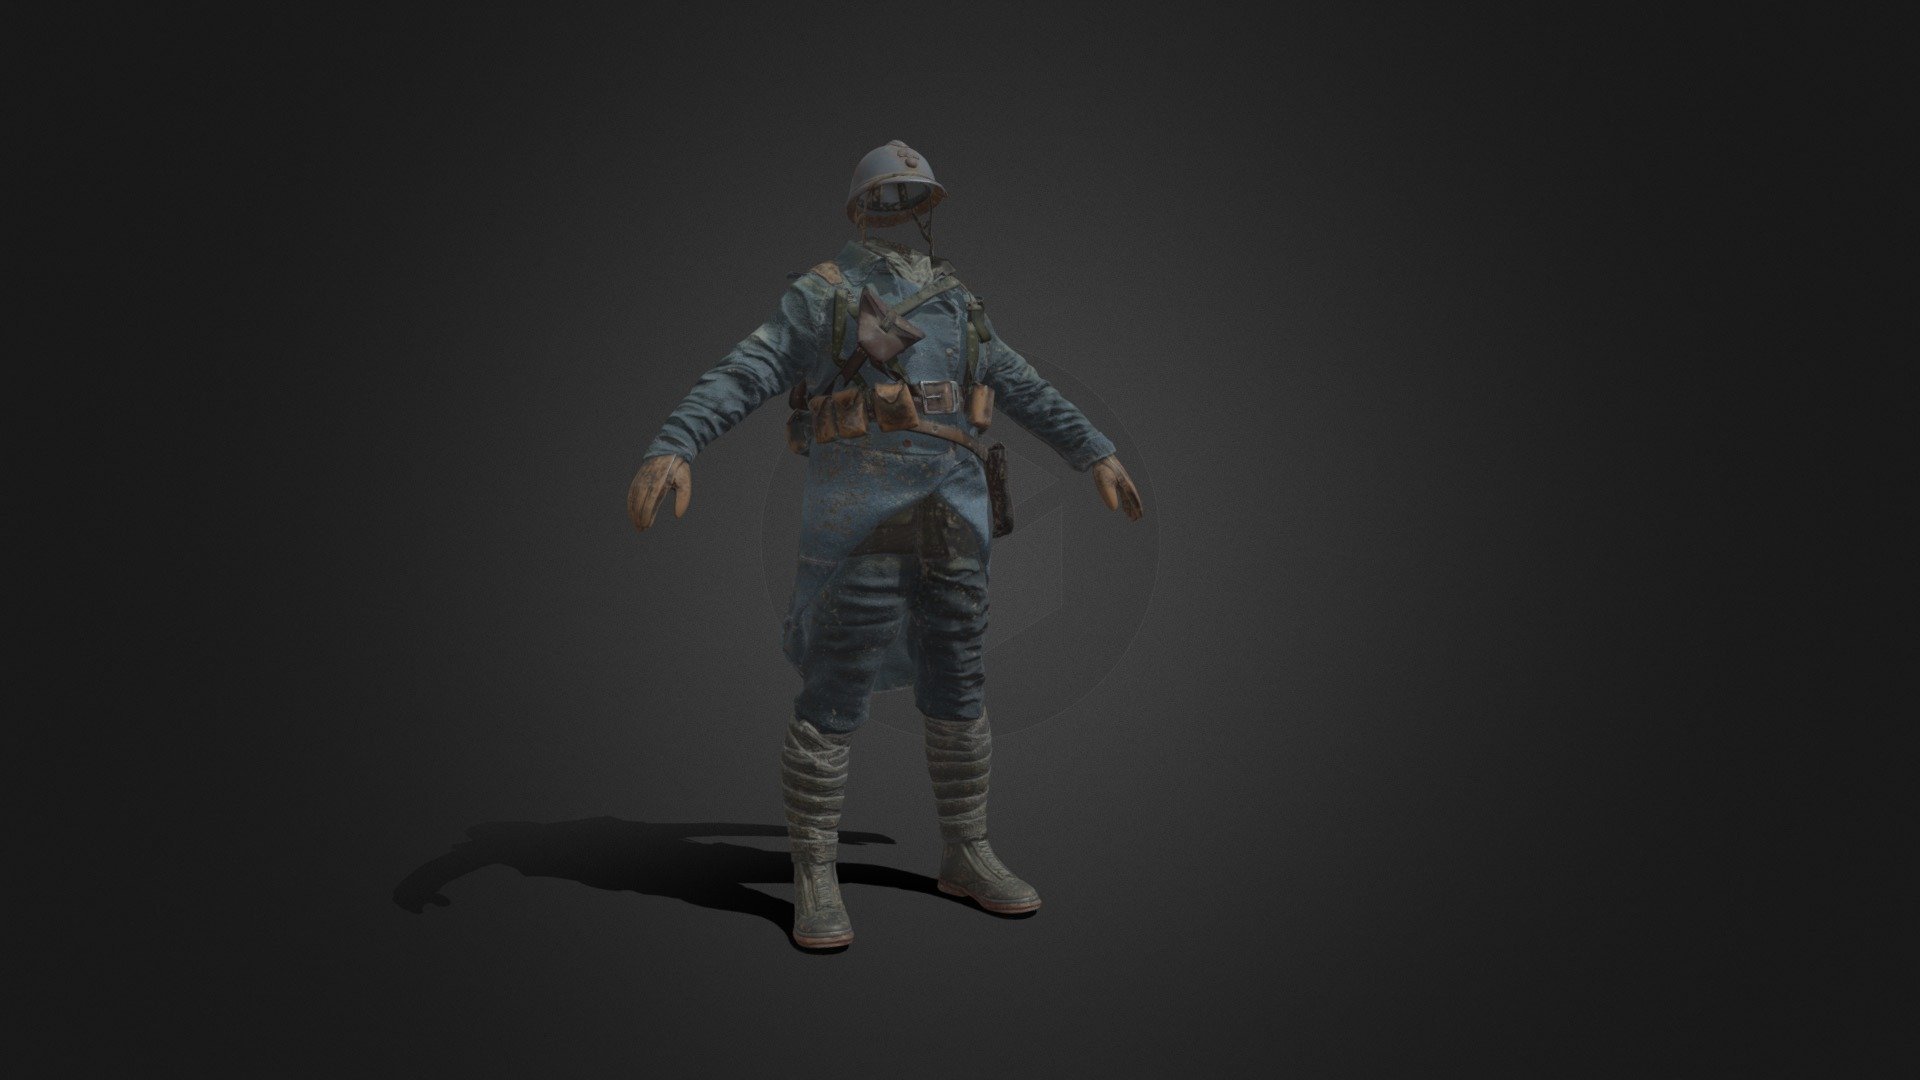 FRENCH WORLD WAR 1 SOLDIER + COAT + BACKPACK 3D French soldier uniform With Adrian Helmet Poilu from the World war 1 suit modeled in high precision. this is a mix between several references i found. this model has been accurately recreated in 3d High poly to keep every details.

The entire model was textured with its accessories relying on references and actual products. Textures may need to be relocate after uncompressing the Texture file into your production folder. If you are using another software, you'll need to recreate a PBR metallic roughness based shader and connect the UDIM textures into it


4K Textures. (PBR Metallic Roughness, UDIM uvs )

Royalty Free License ( Cf Cgtrader Terms and conditions ). Can be used in any type of projects : Image, render, vfx, commercial, Nft, video, film, games. Reselling Any parts, modified parts, baked Geometry or texture, or any ressources or modified ressources from this model in any form is not allowed 3d model